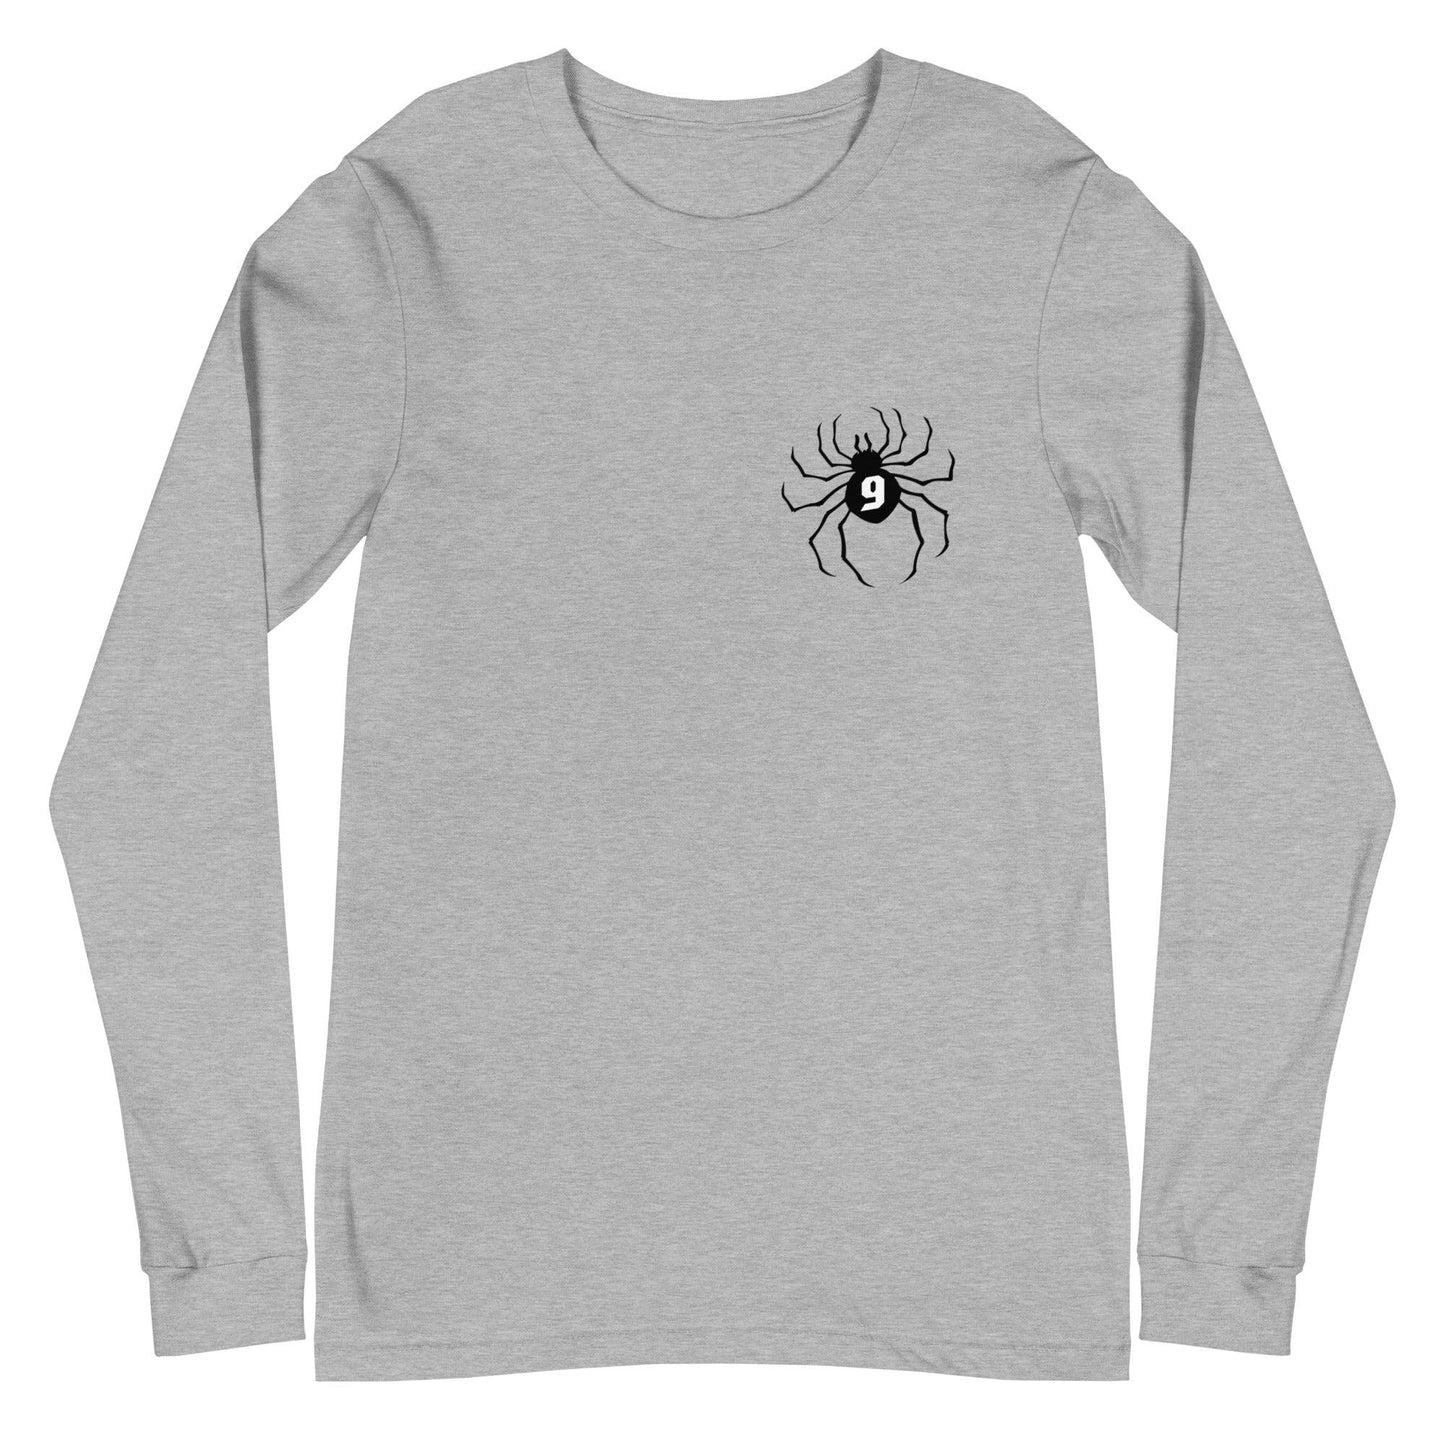 Marquis Dendy "Spider" Long Sleeve Tee - Fan Arch